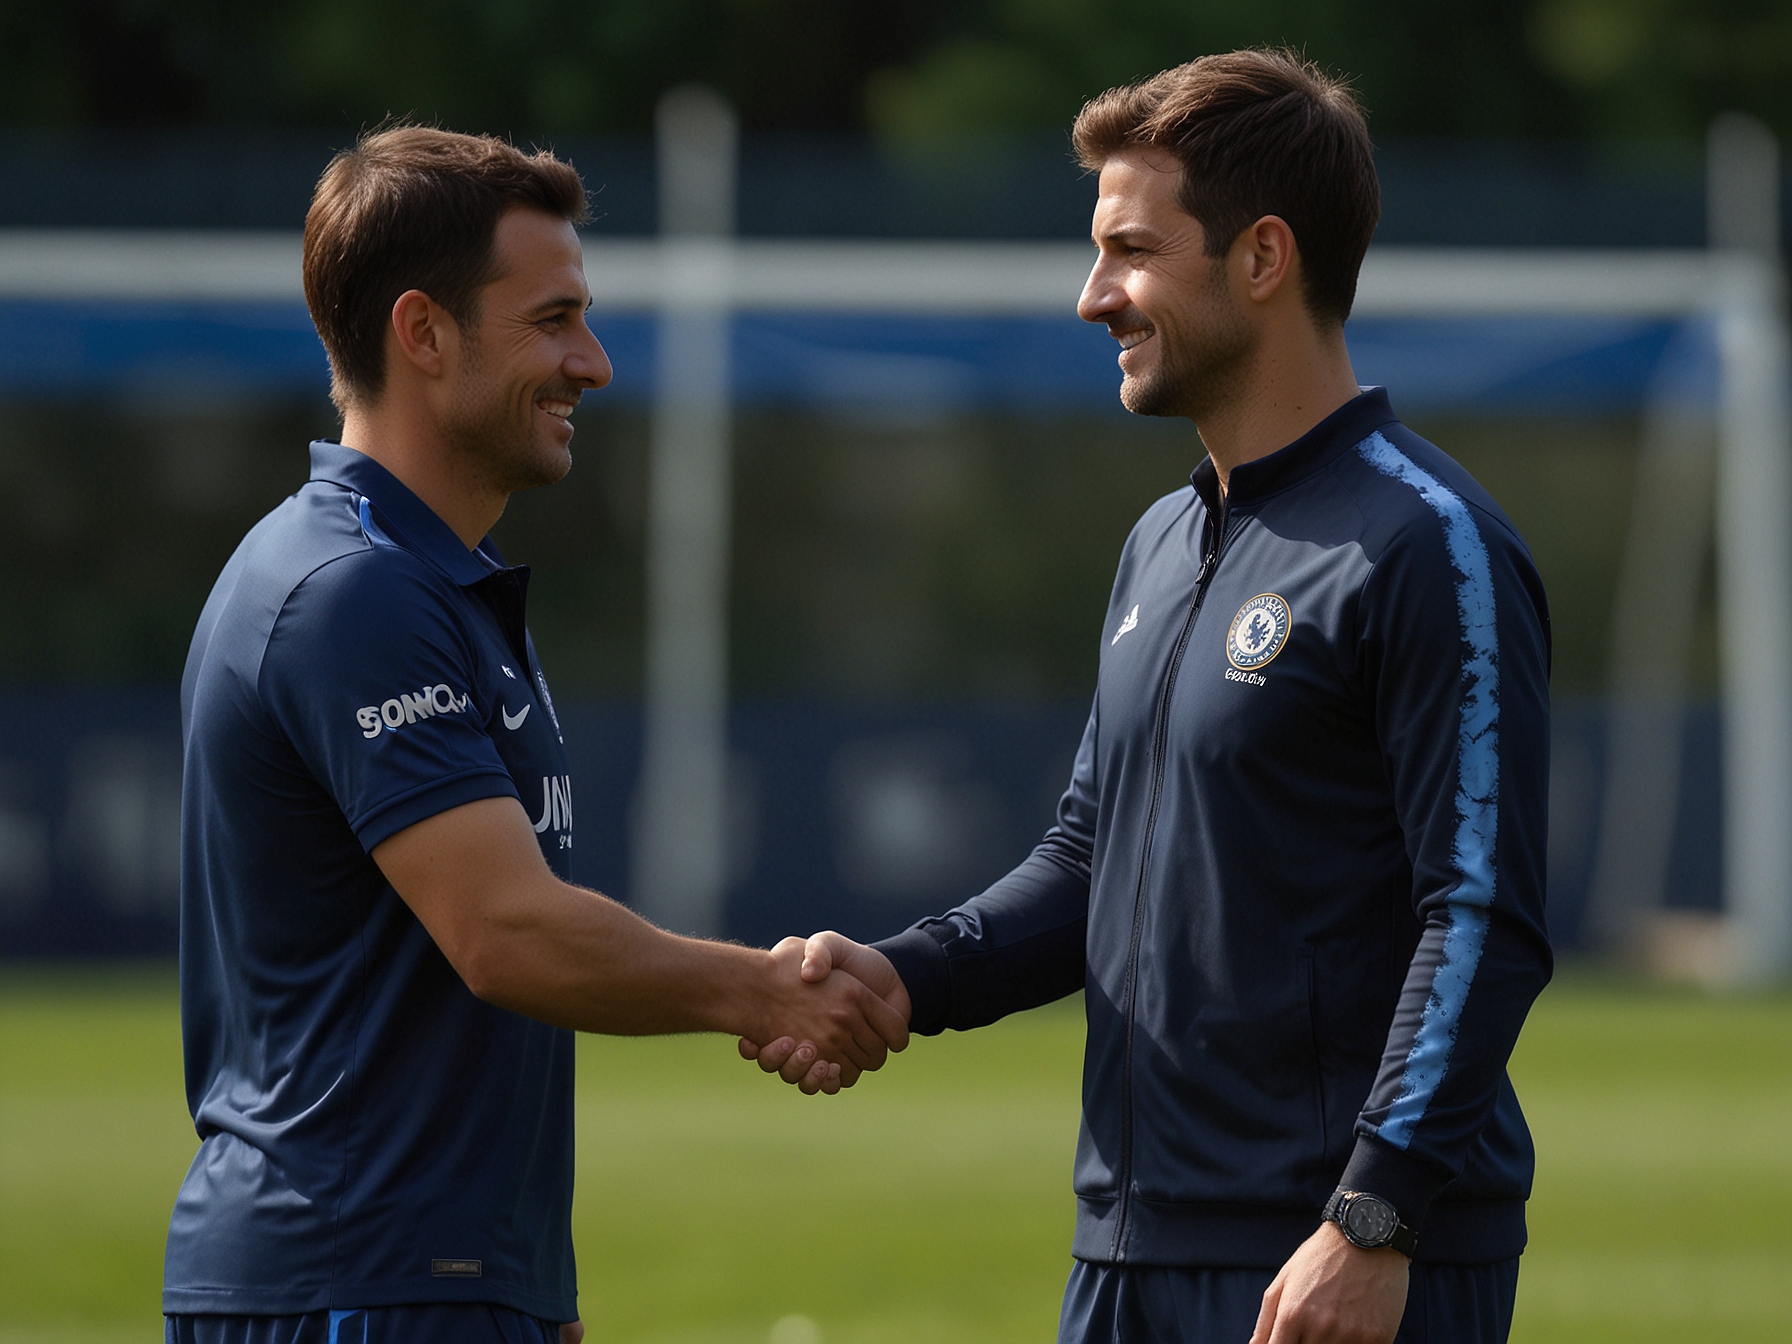 A photo capturing Marc Guiu at Chelsea's training ground, shaking hands with the club's manager, symbolizing his next career step and Chelsea's investment in young talent.